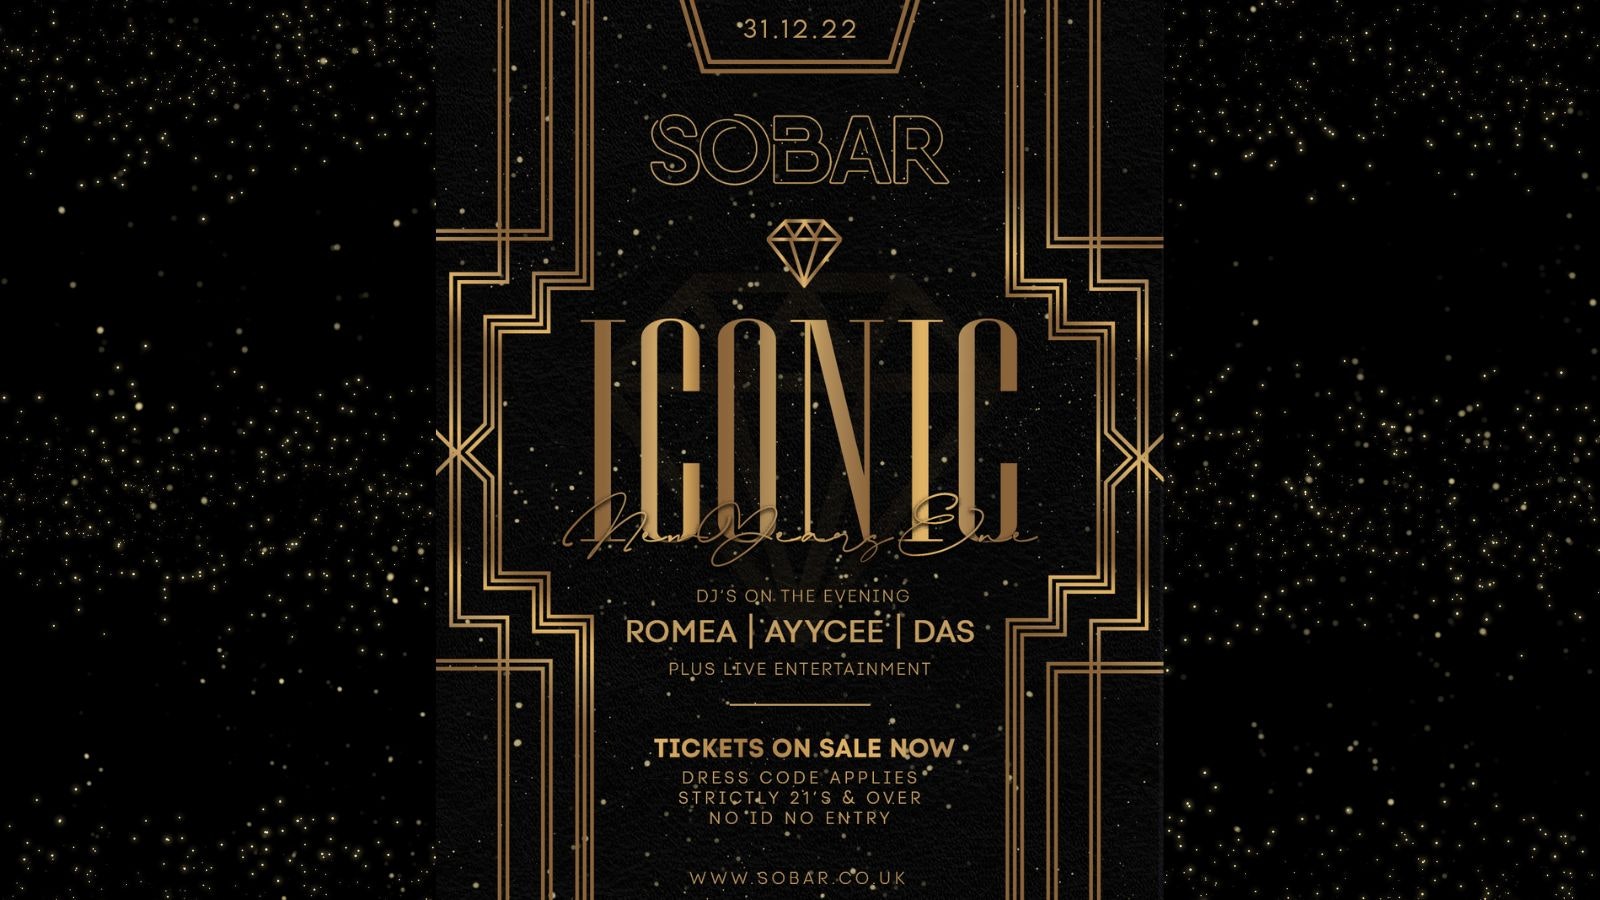 SOBAR Presents “ICONIC” New Years Eve Party 2022